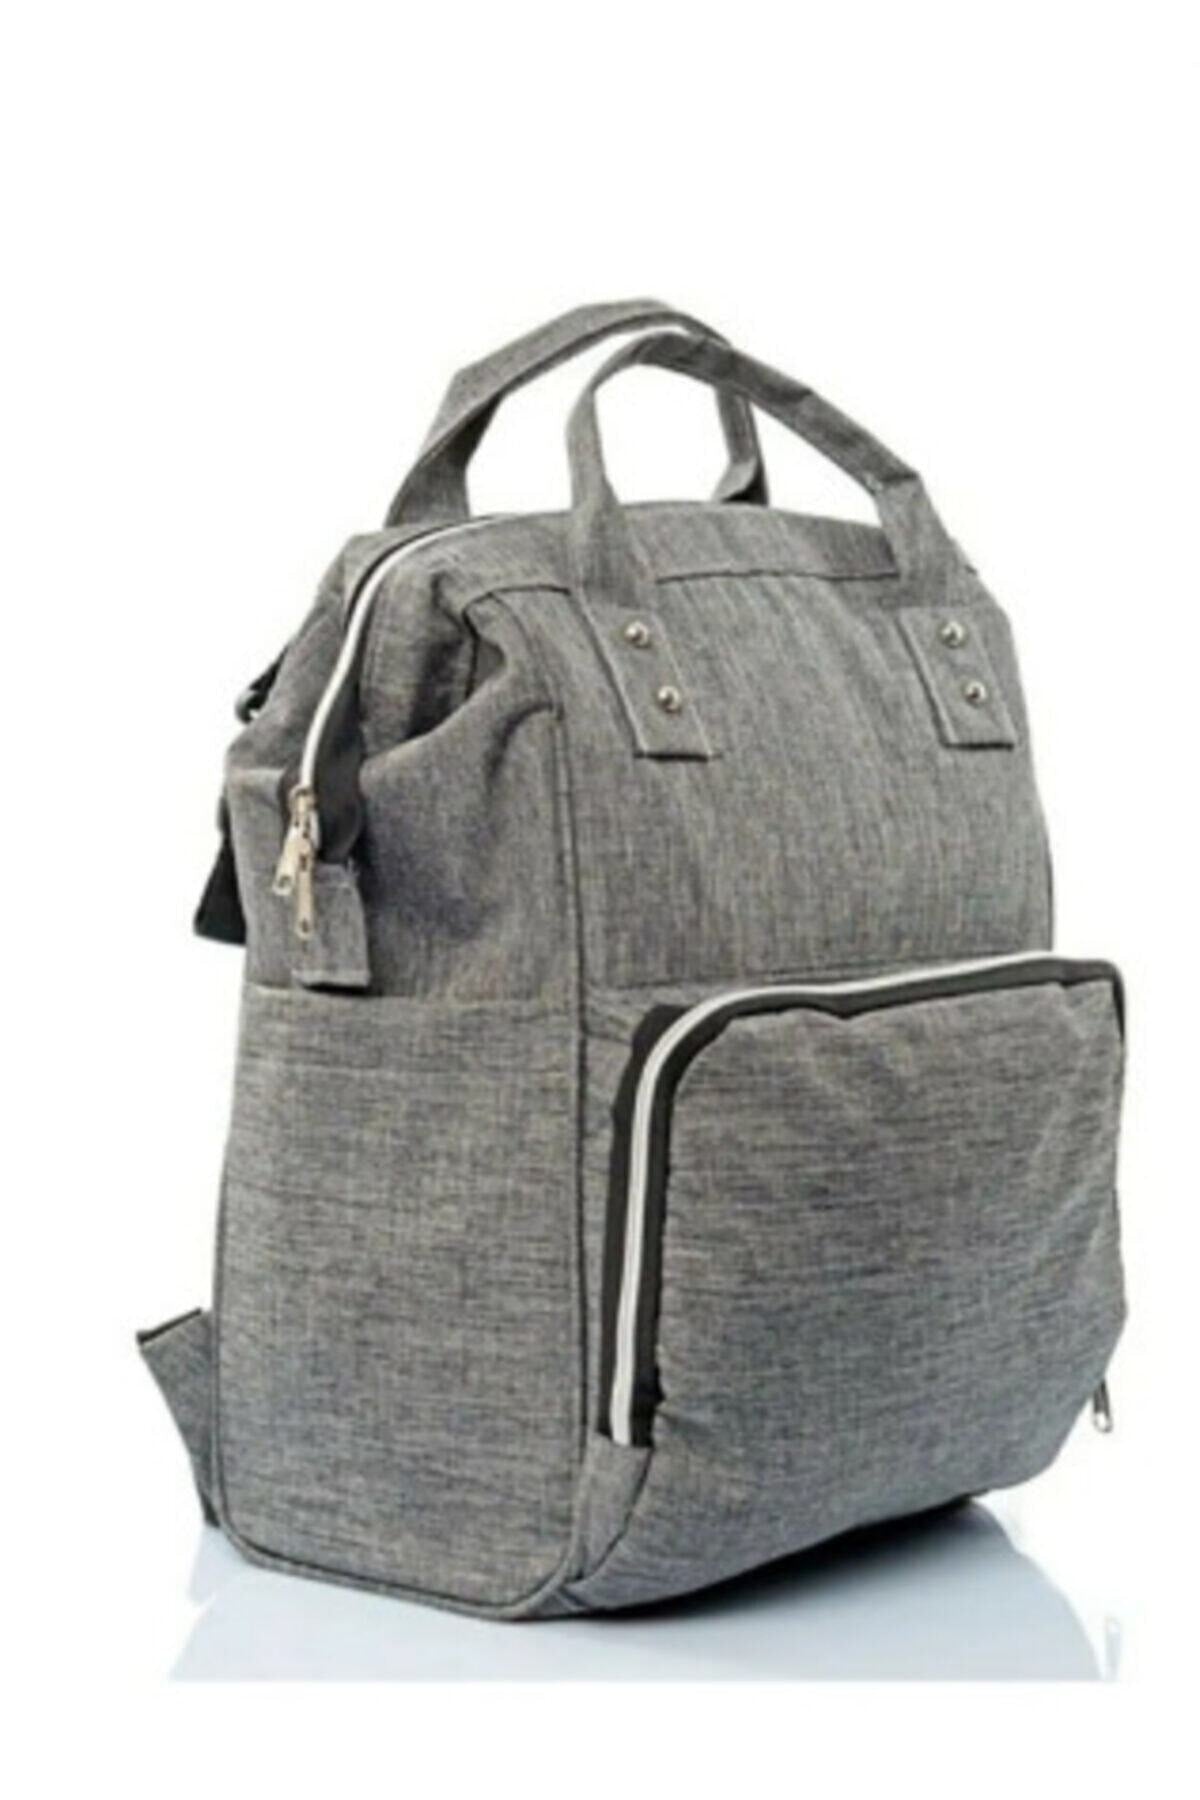 26-Mother Baby Care Backpack Gray (New)